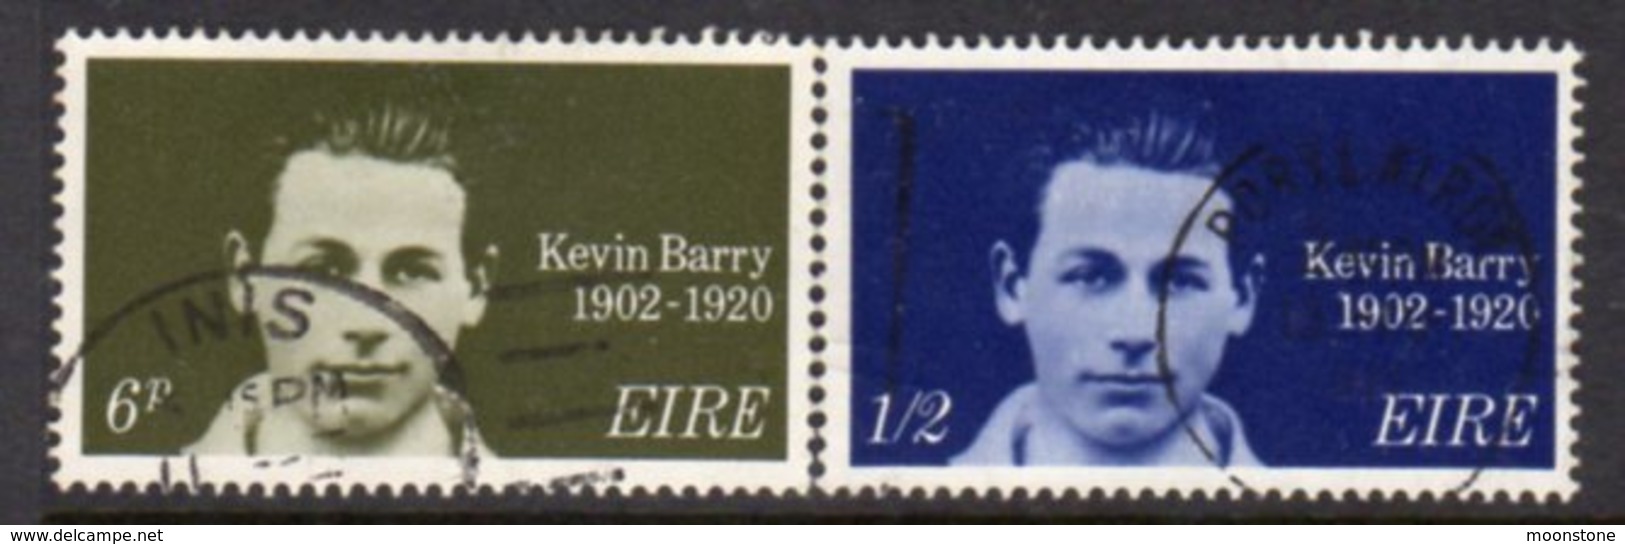 Ireland 1970 Kevin Barry 50th Death Anniversary Set Of 2, Used, SG 285/6 - Used Stamps